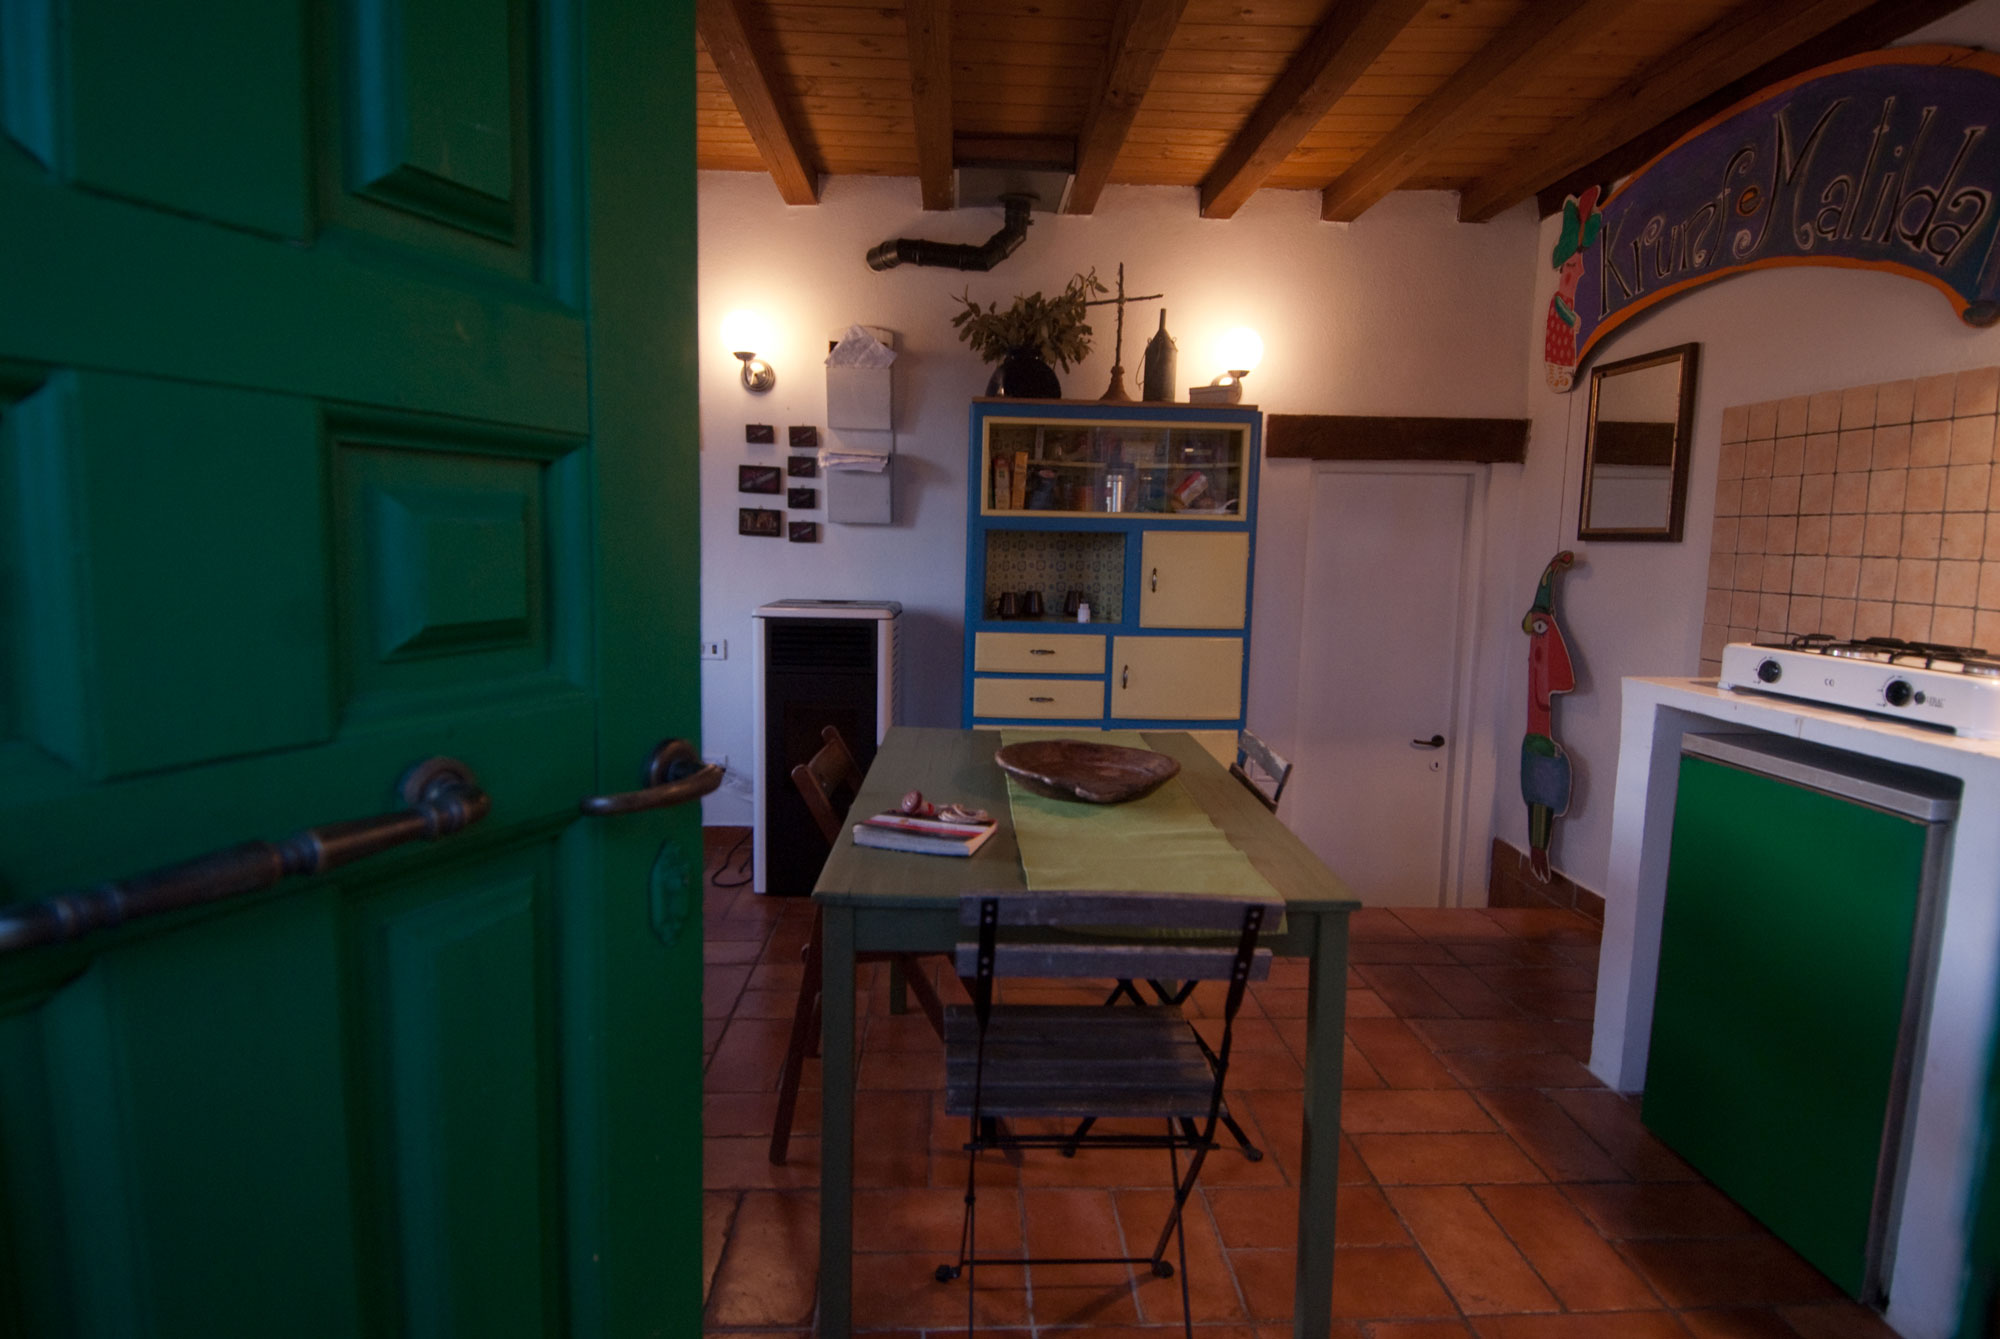 Hostel entrance with equipped kitchen for cooking